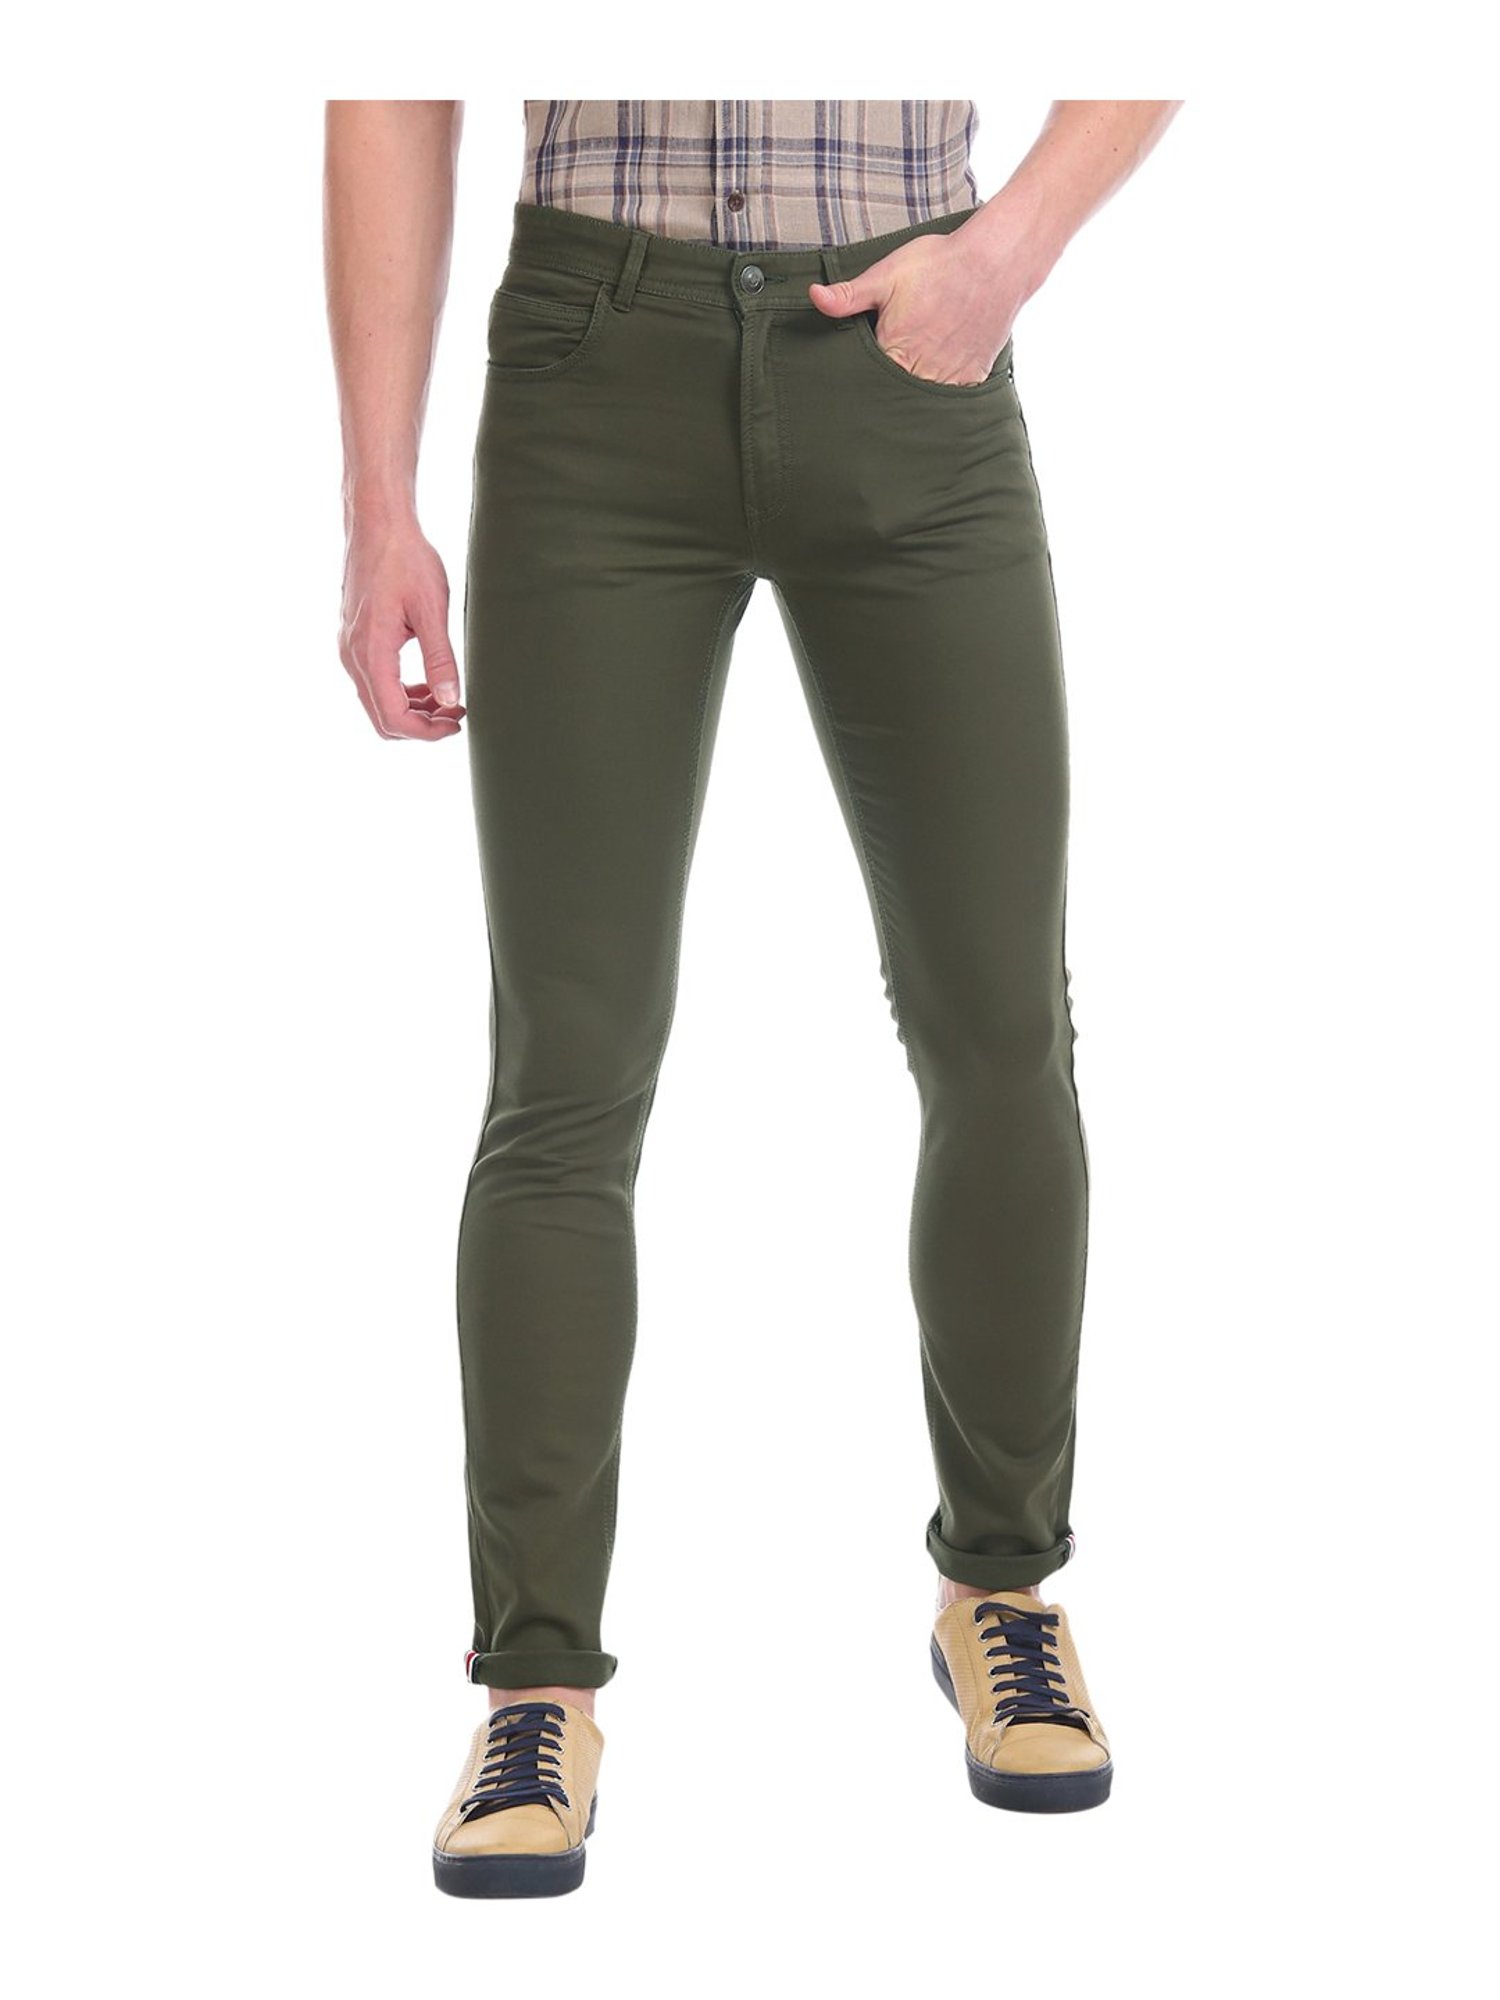 Buy Arrow Brown Cotton Regular Fit Self Pattern Trousers for Mens Online   Tata CLiQ